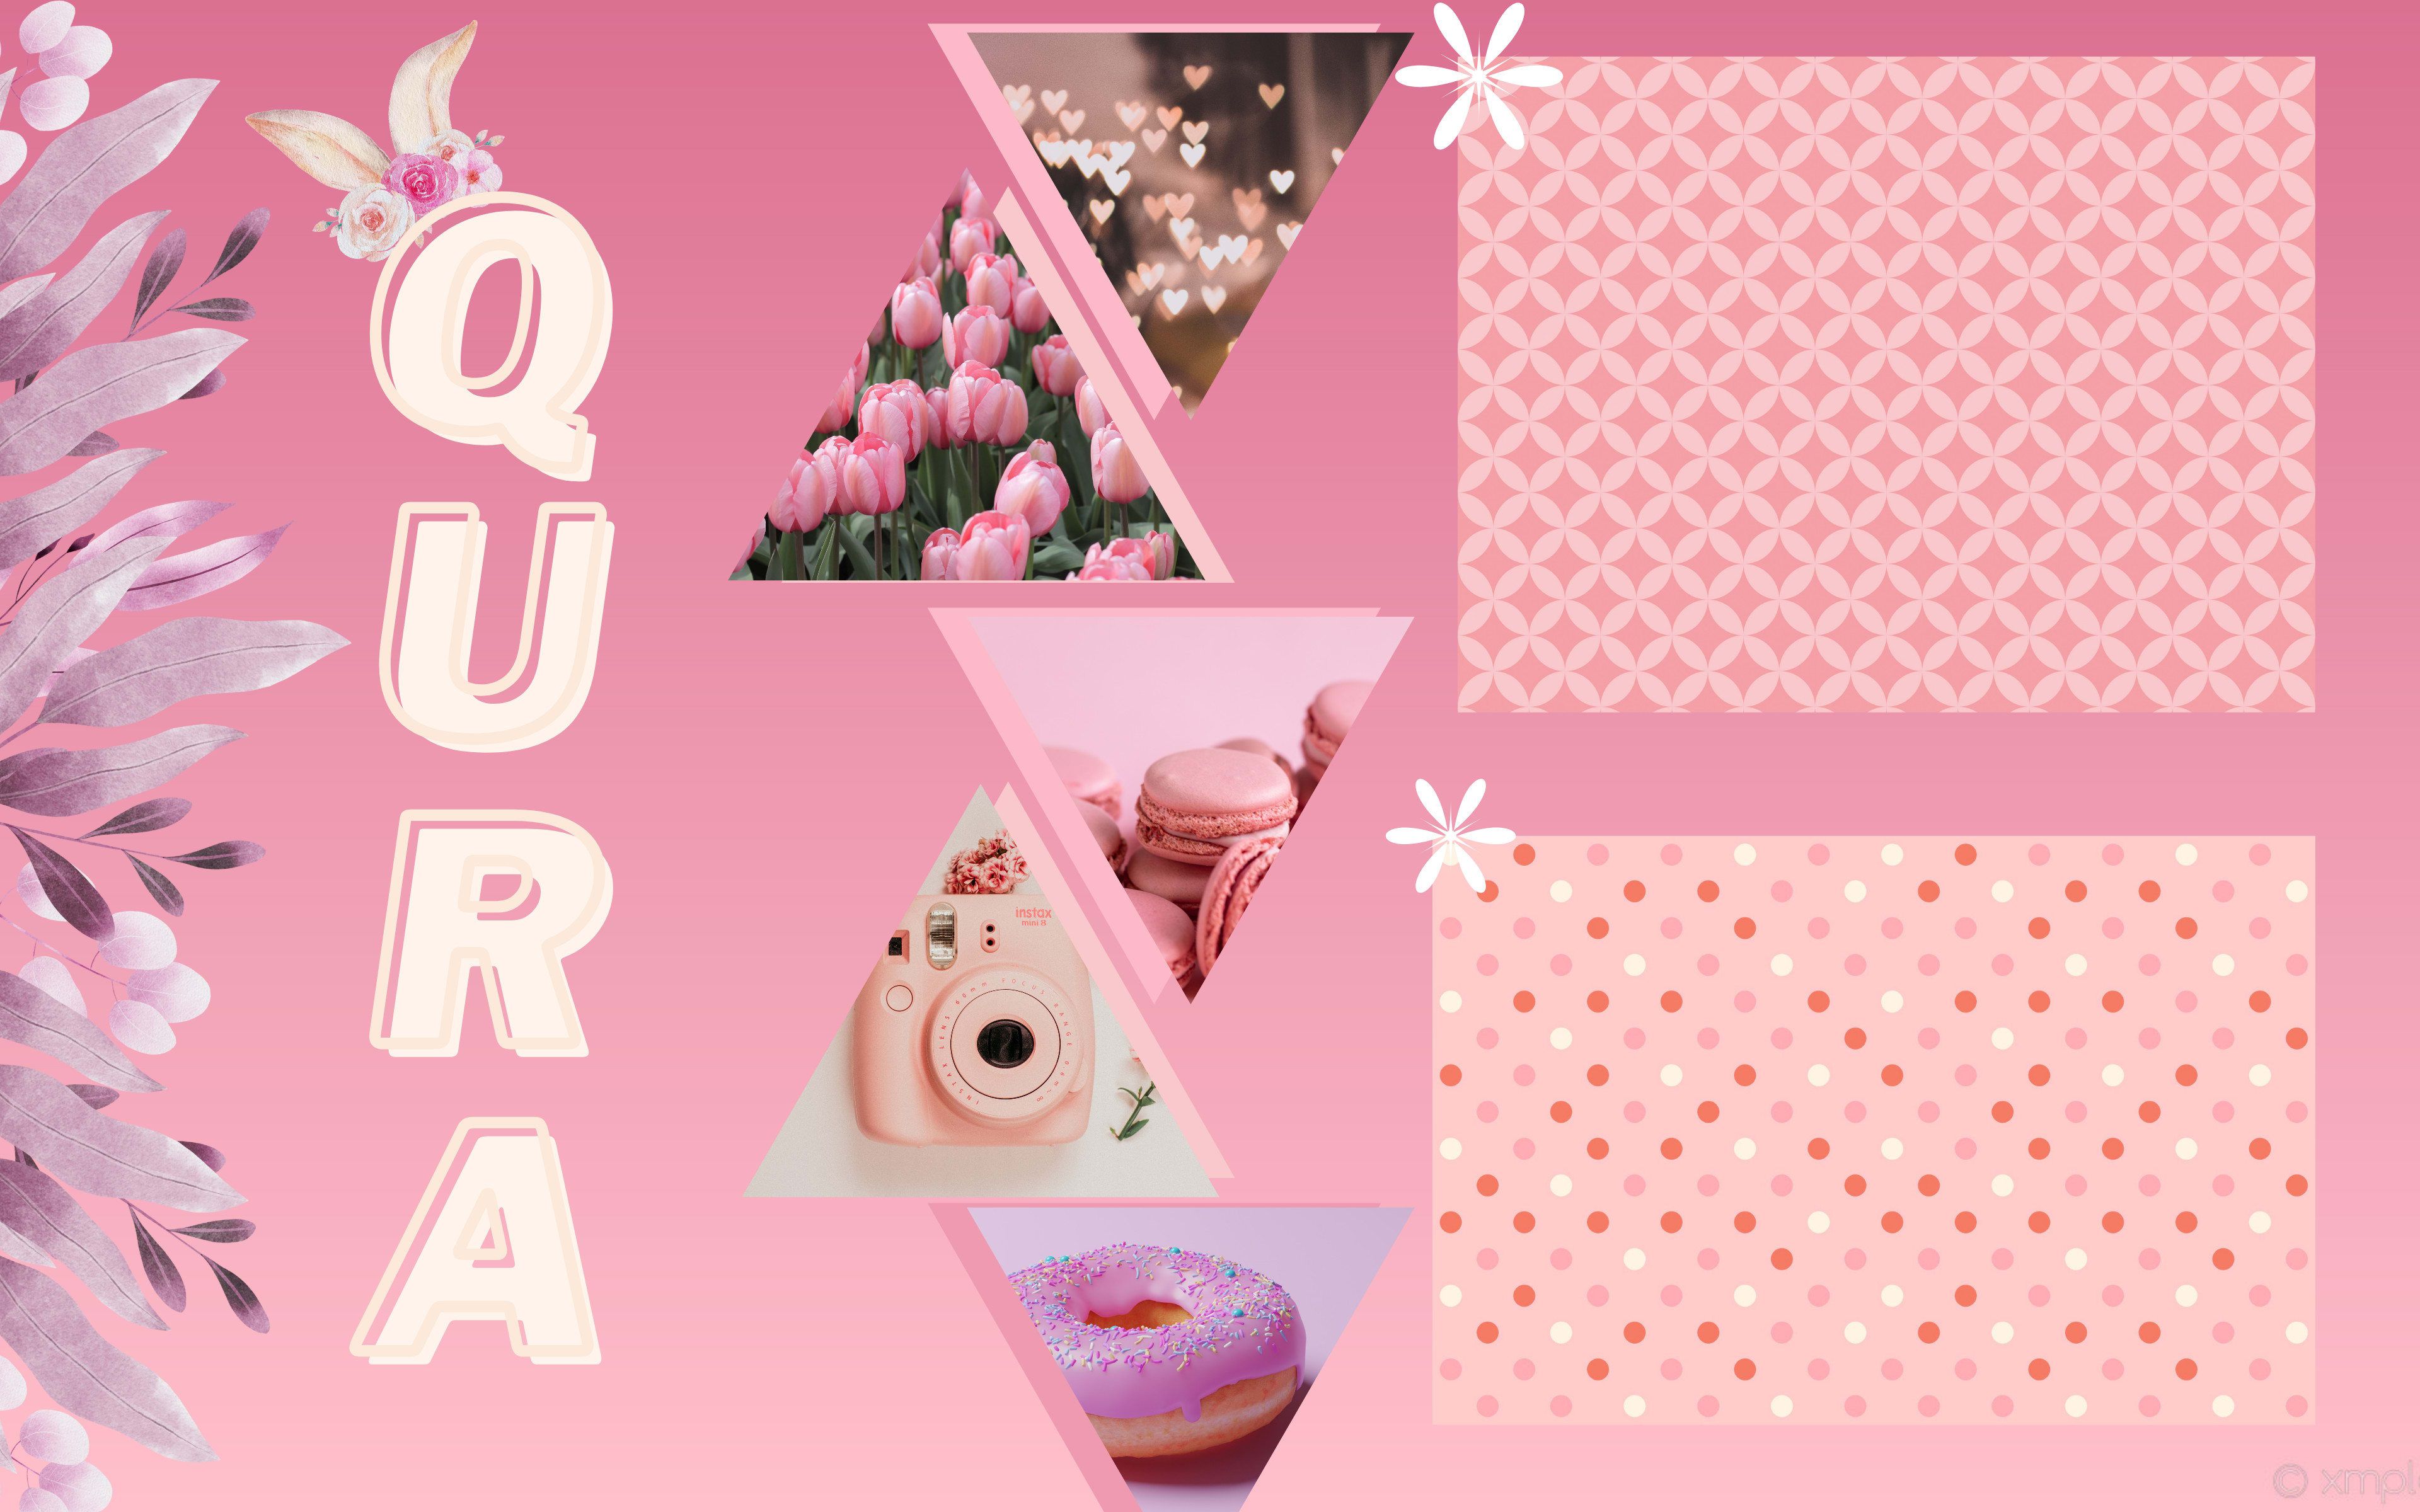 A pink themed collage with a variety of pink images - Design